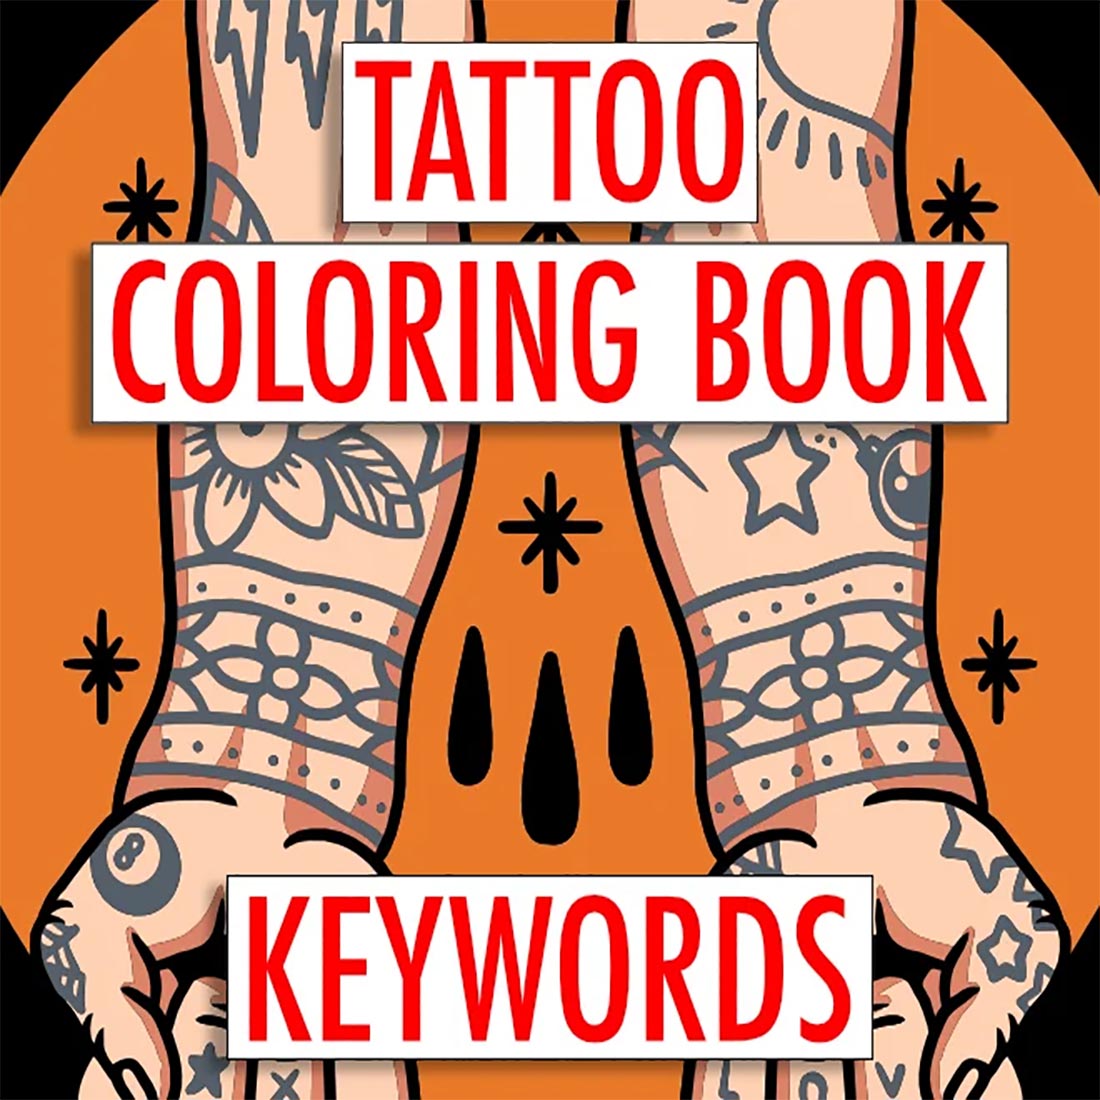 63 Tattoo Coloring Book Keywords preview image.